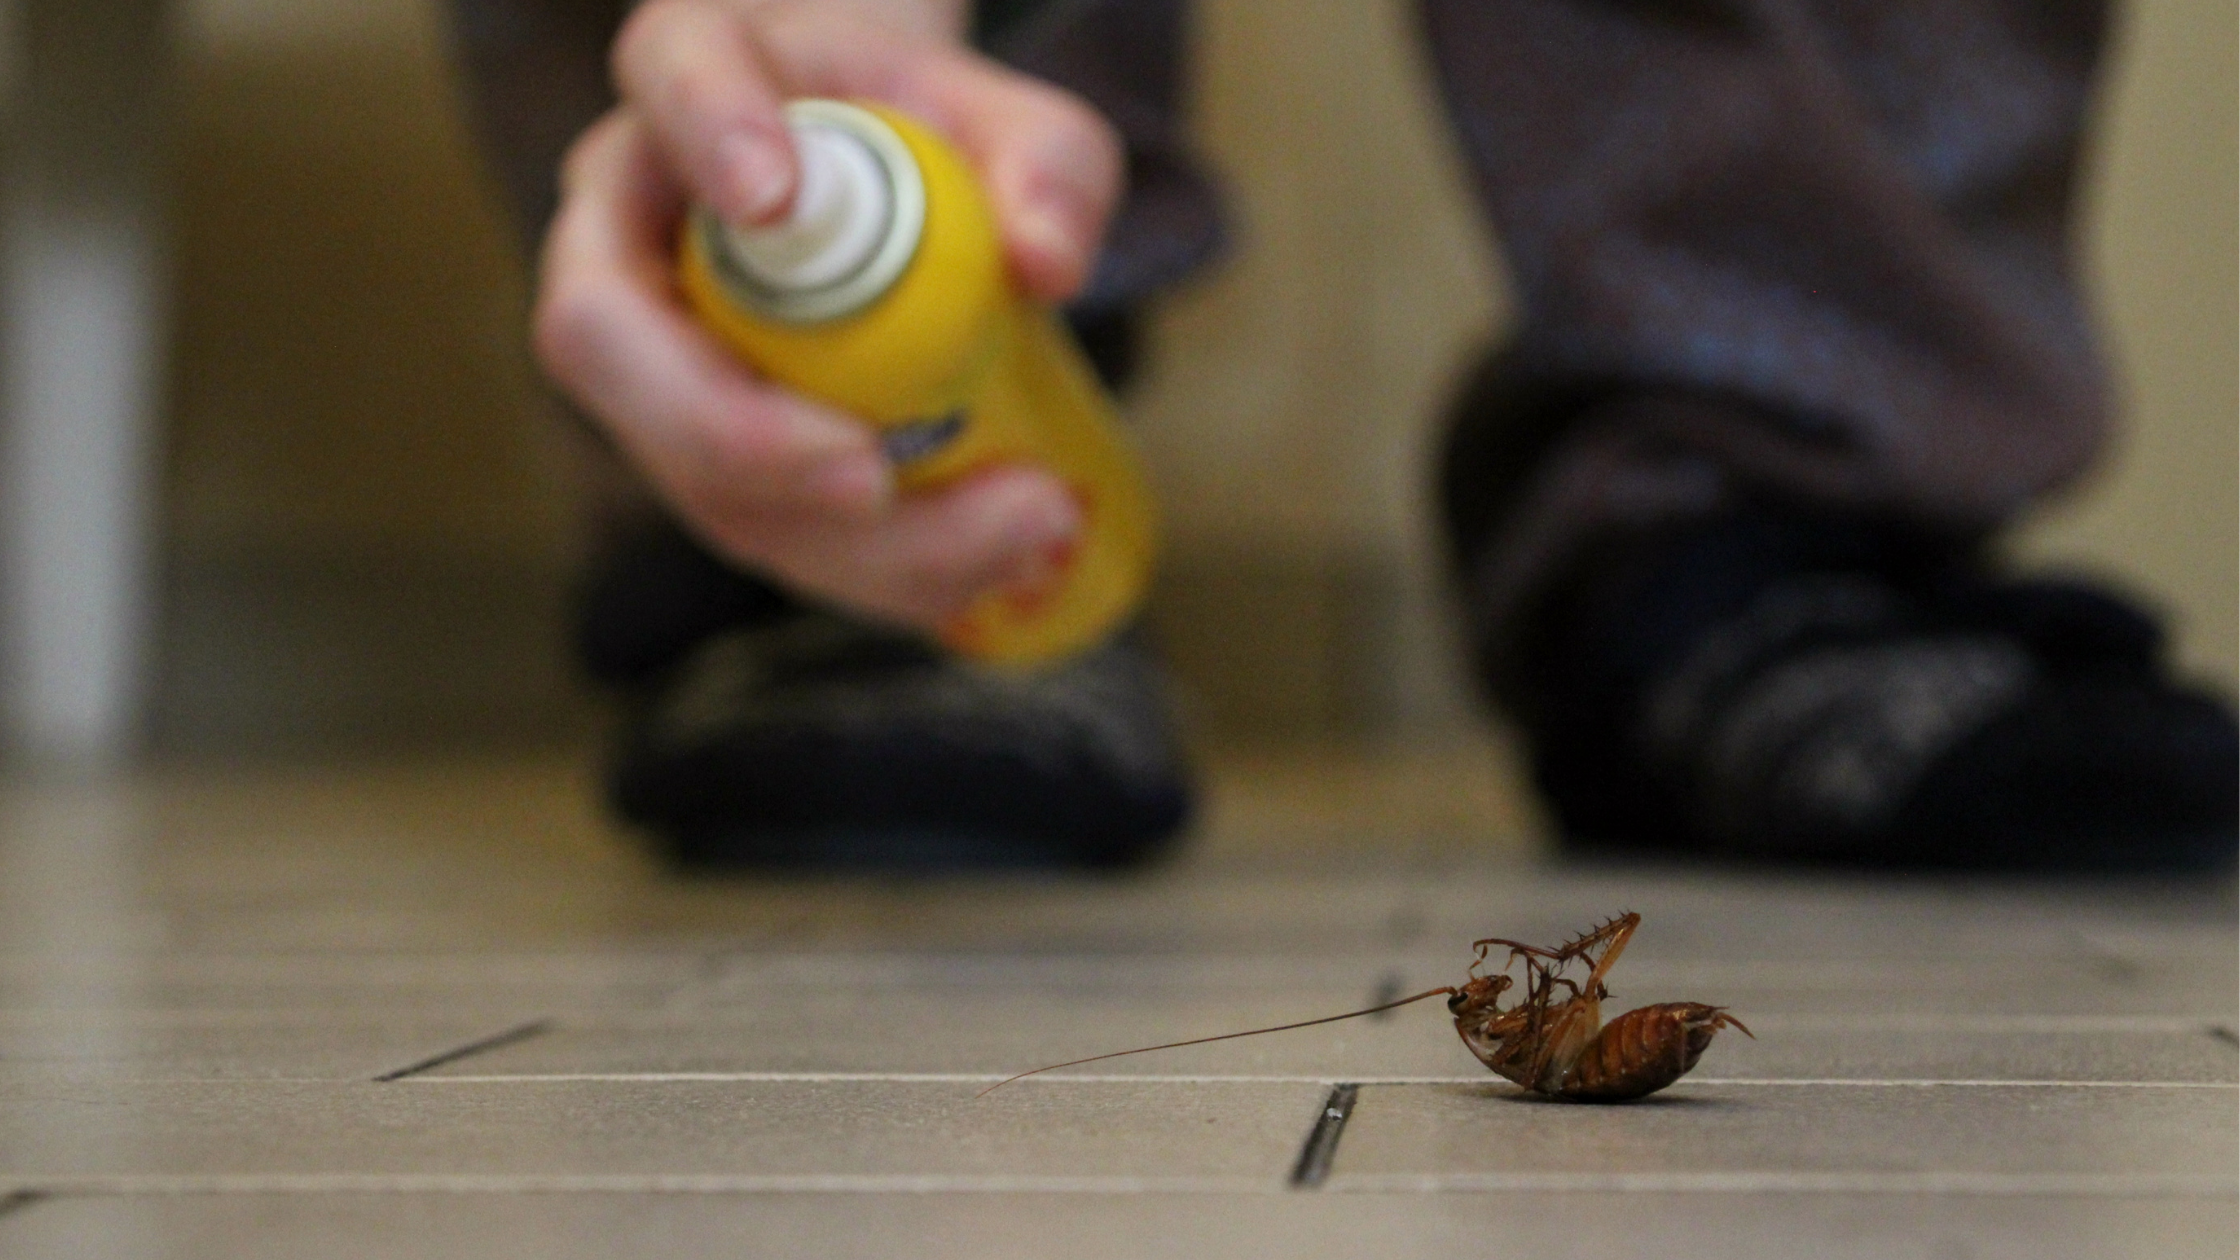 Why Should You Not DIY for Pest Control?